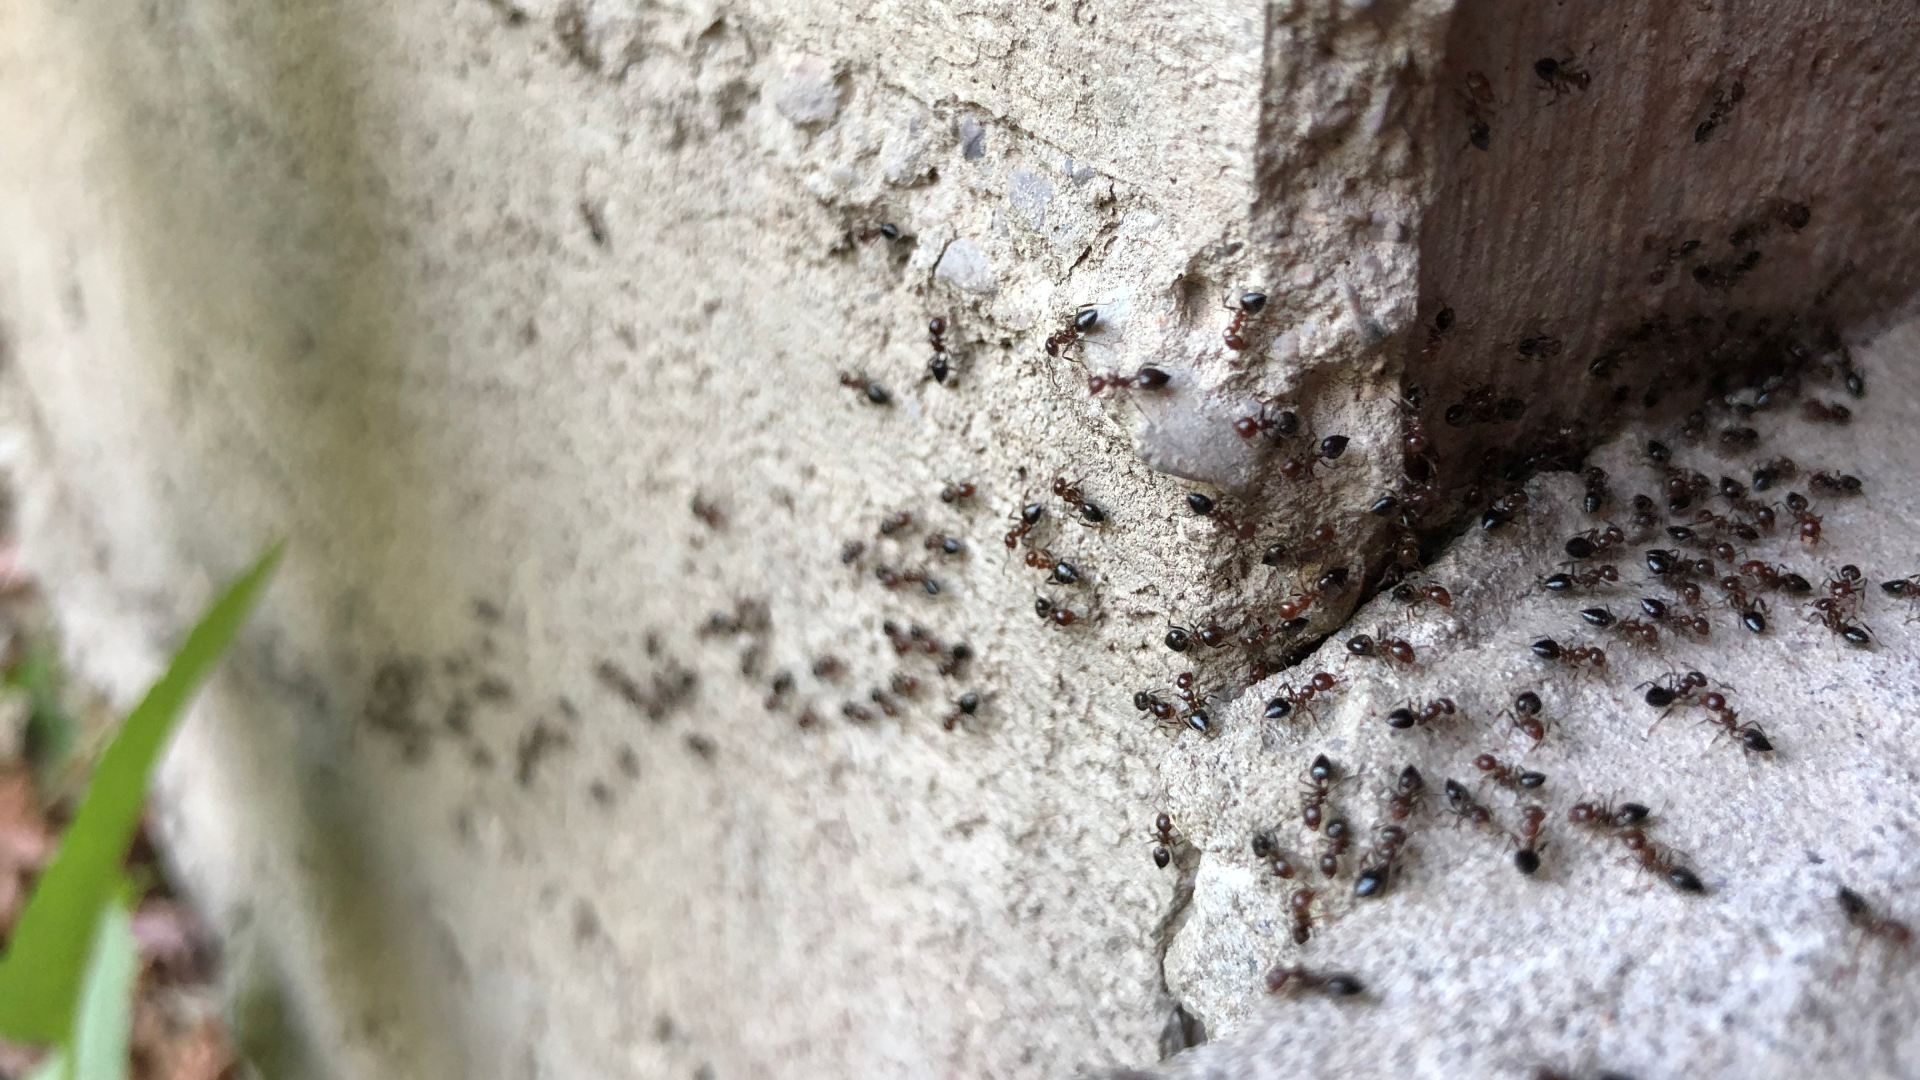 Ant infestation found on property in Watauga, TX.